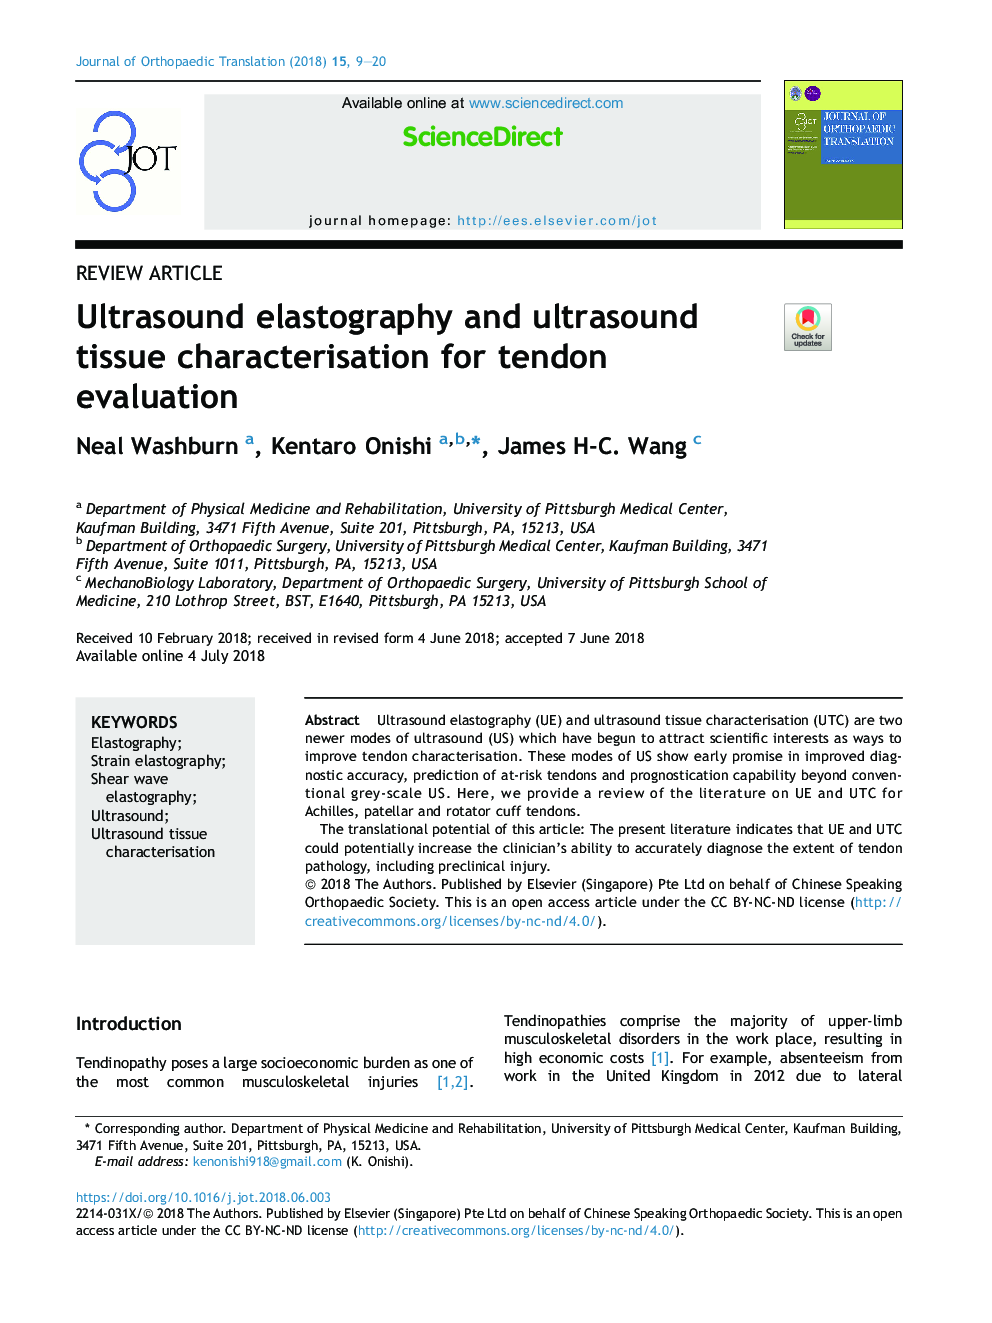 Ultrasound elastography and ultrasound tissue characterisation for tendon evaluation